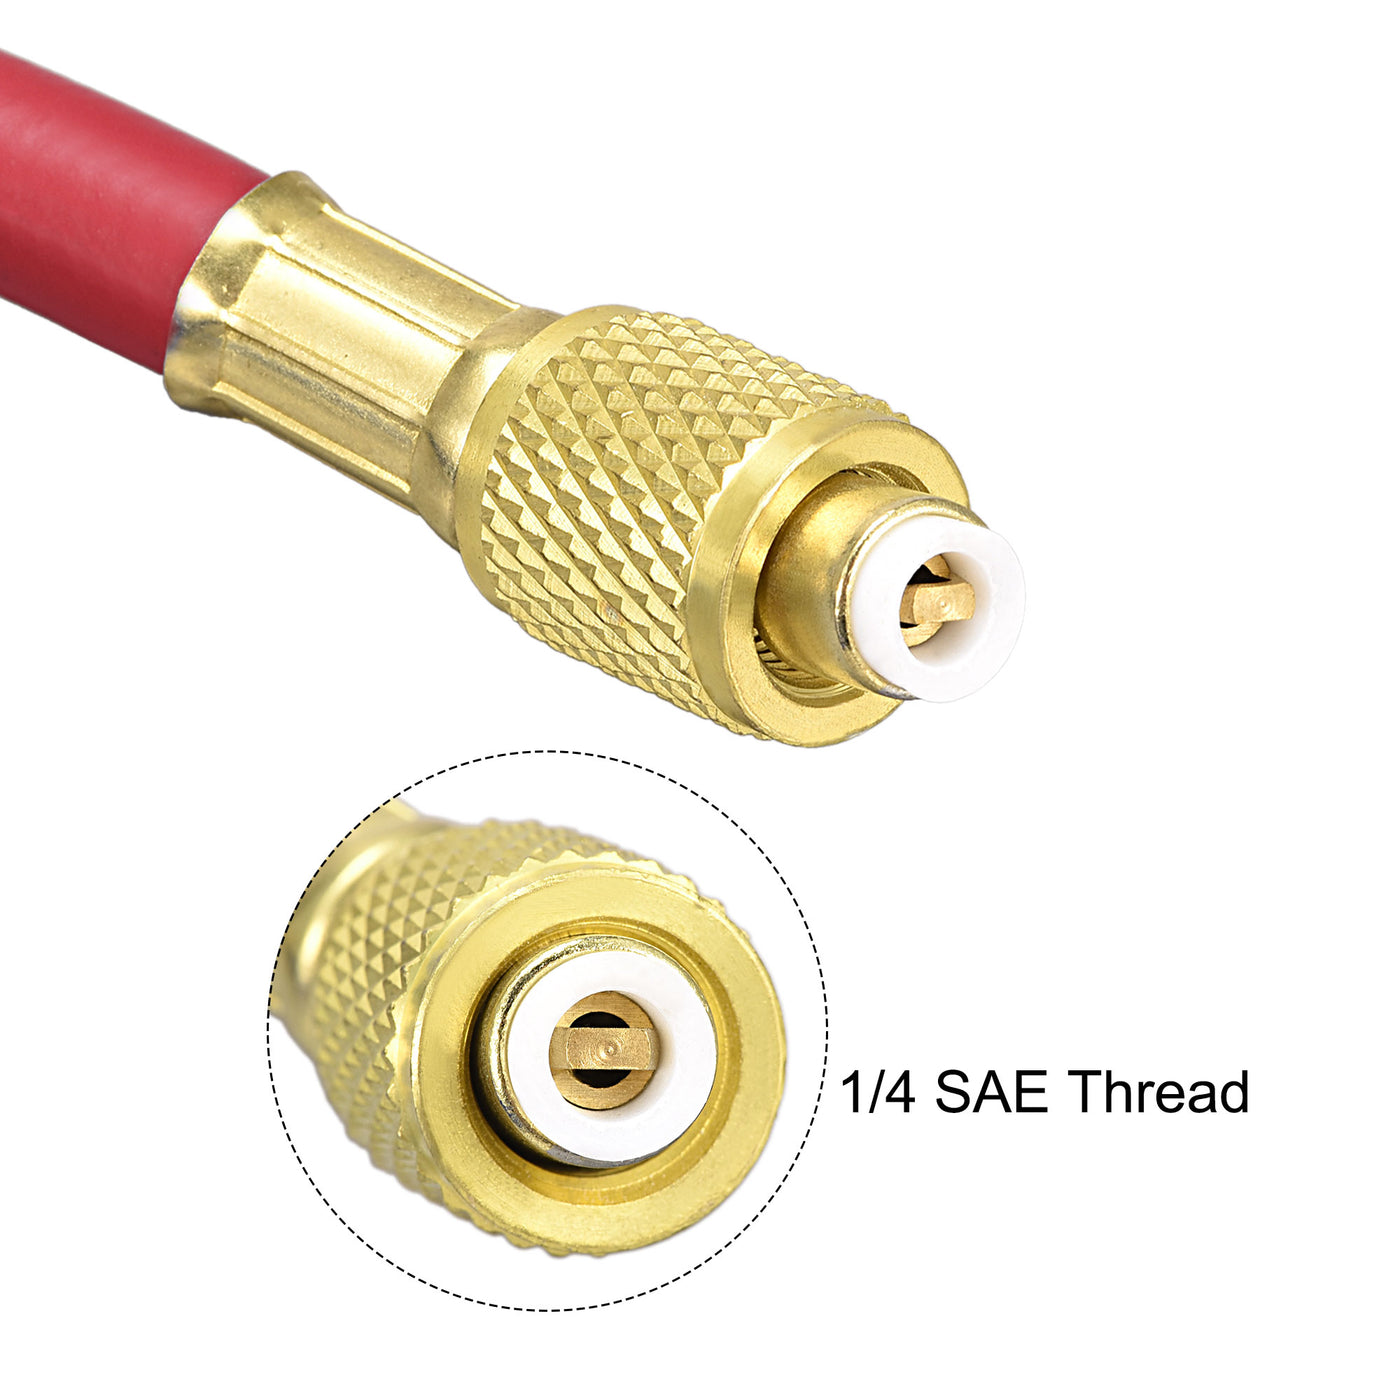 uxcell Uxcell Refrigerant Charging Hose, Copper Plating Connector with Elbow Thread for Automotive or Home Air Conditioner Refrigeration Maintenance